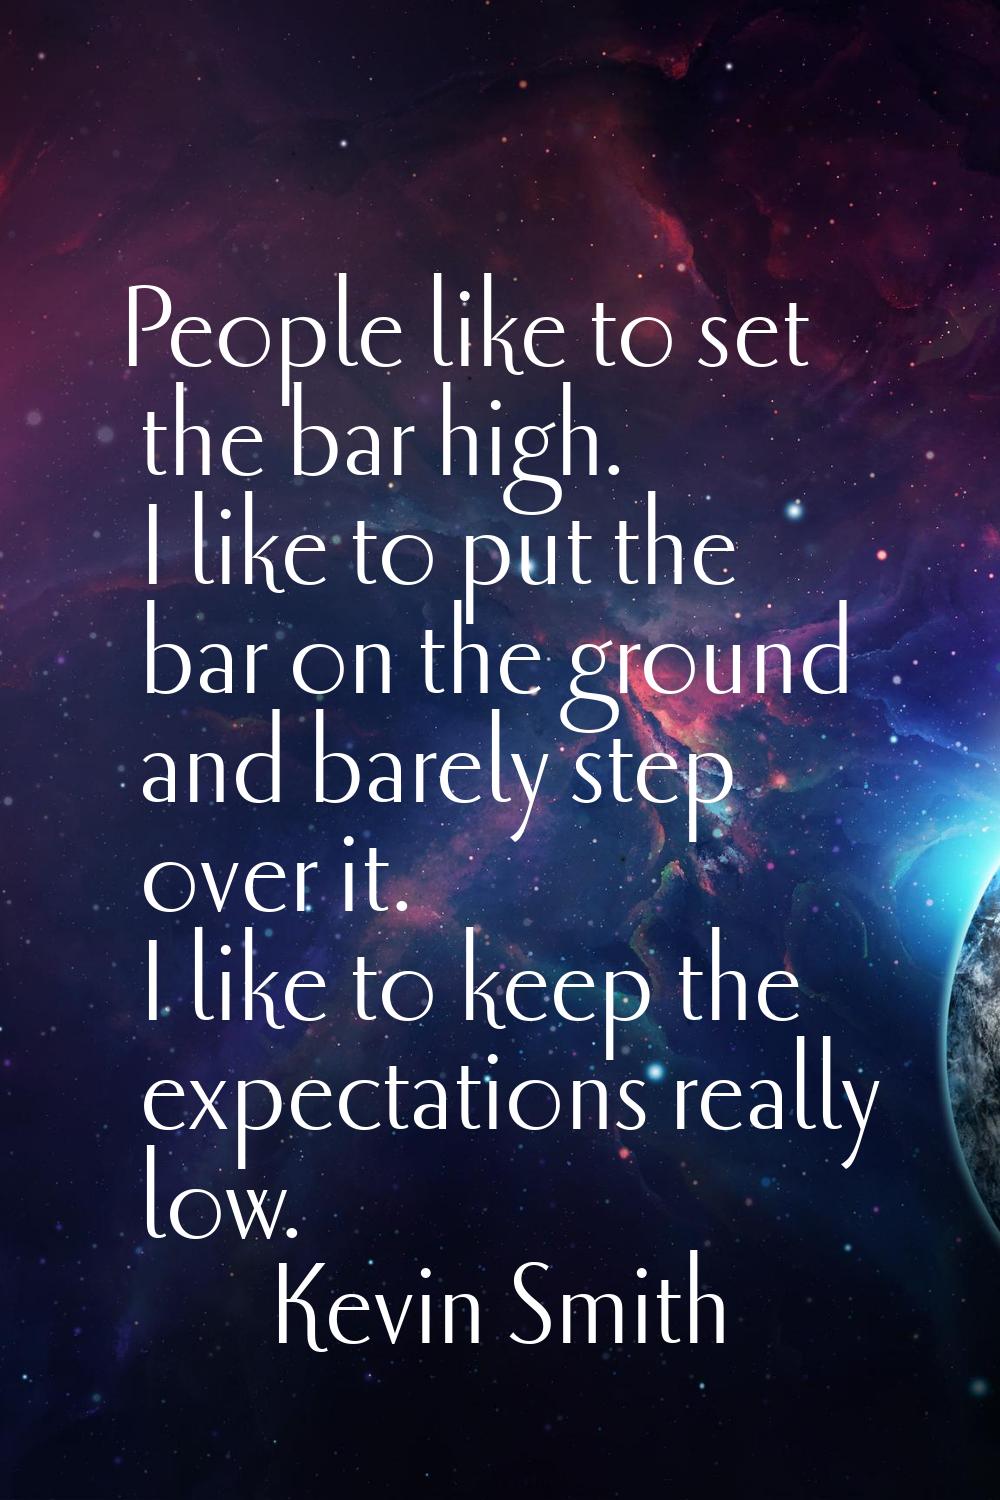 People like to set the bar high. I like to put the bar on the ground and barely step over it. I lik